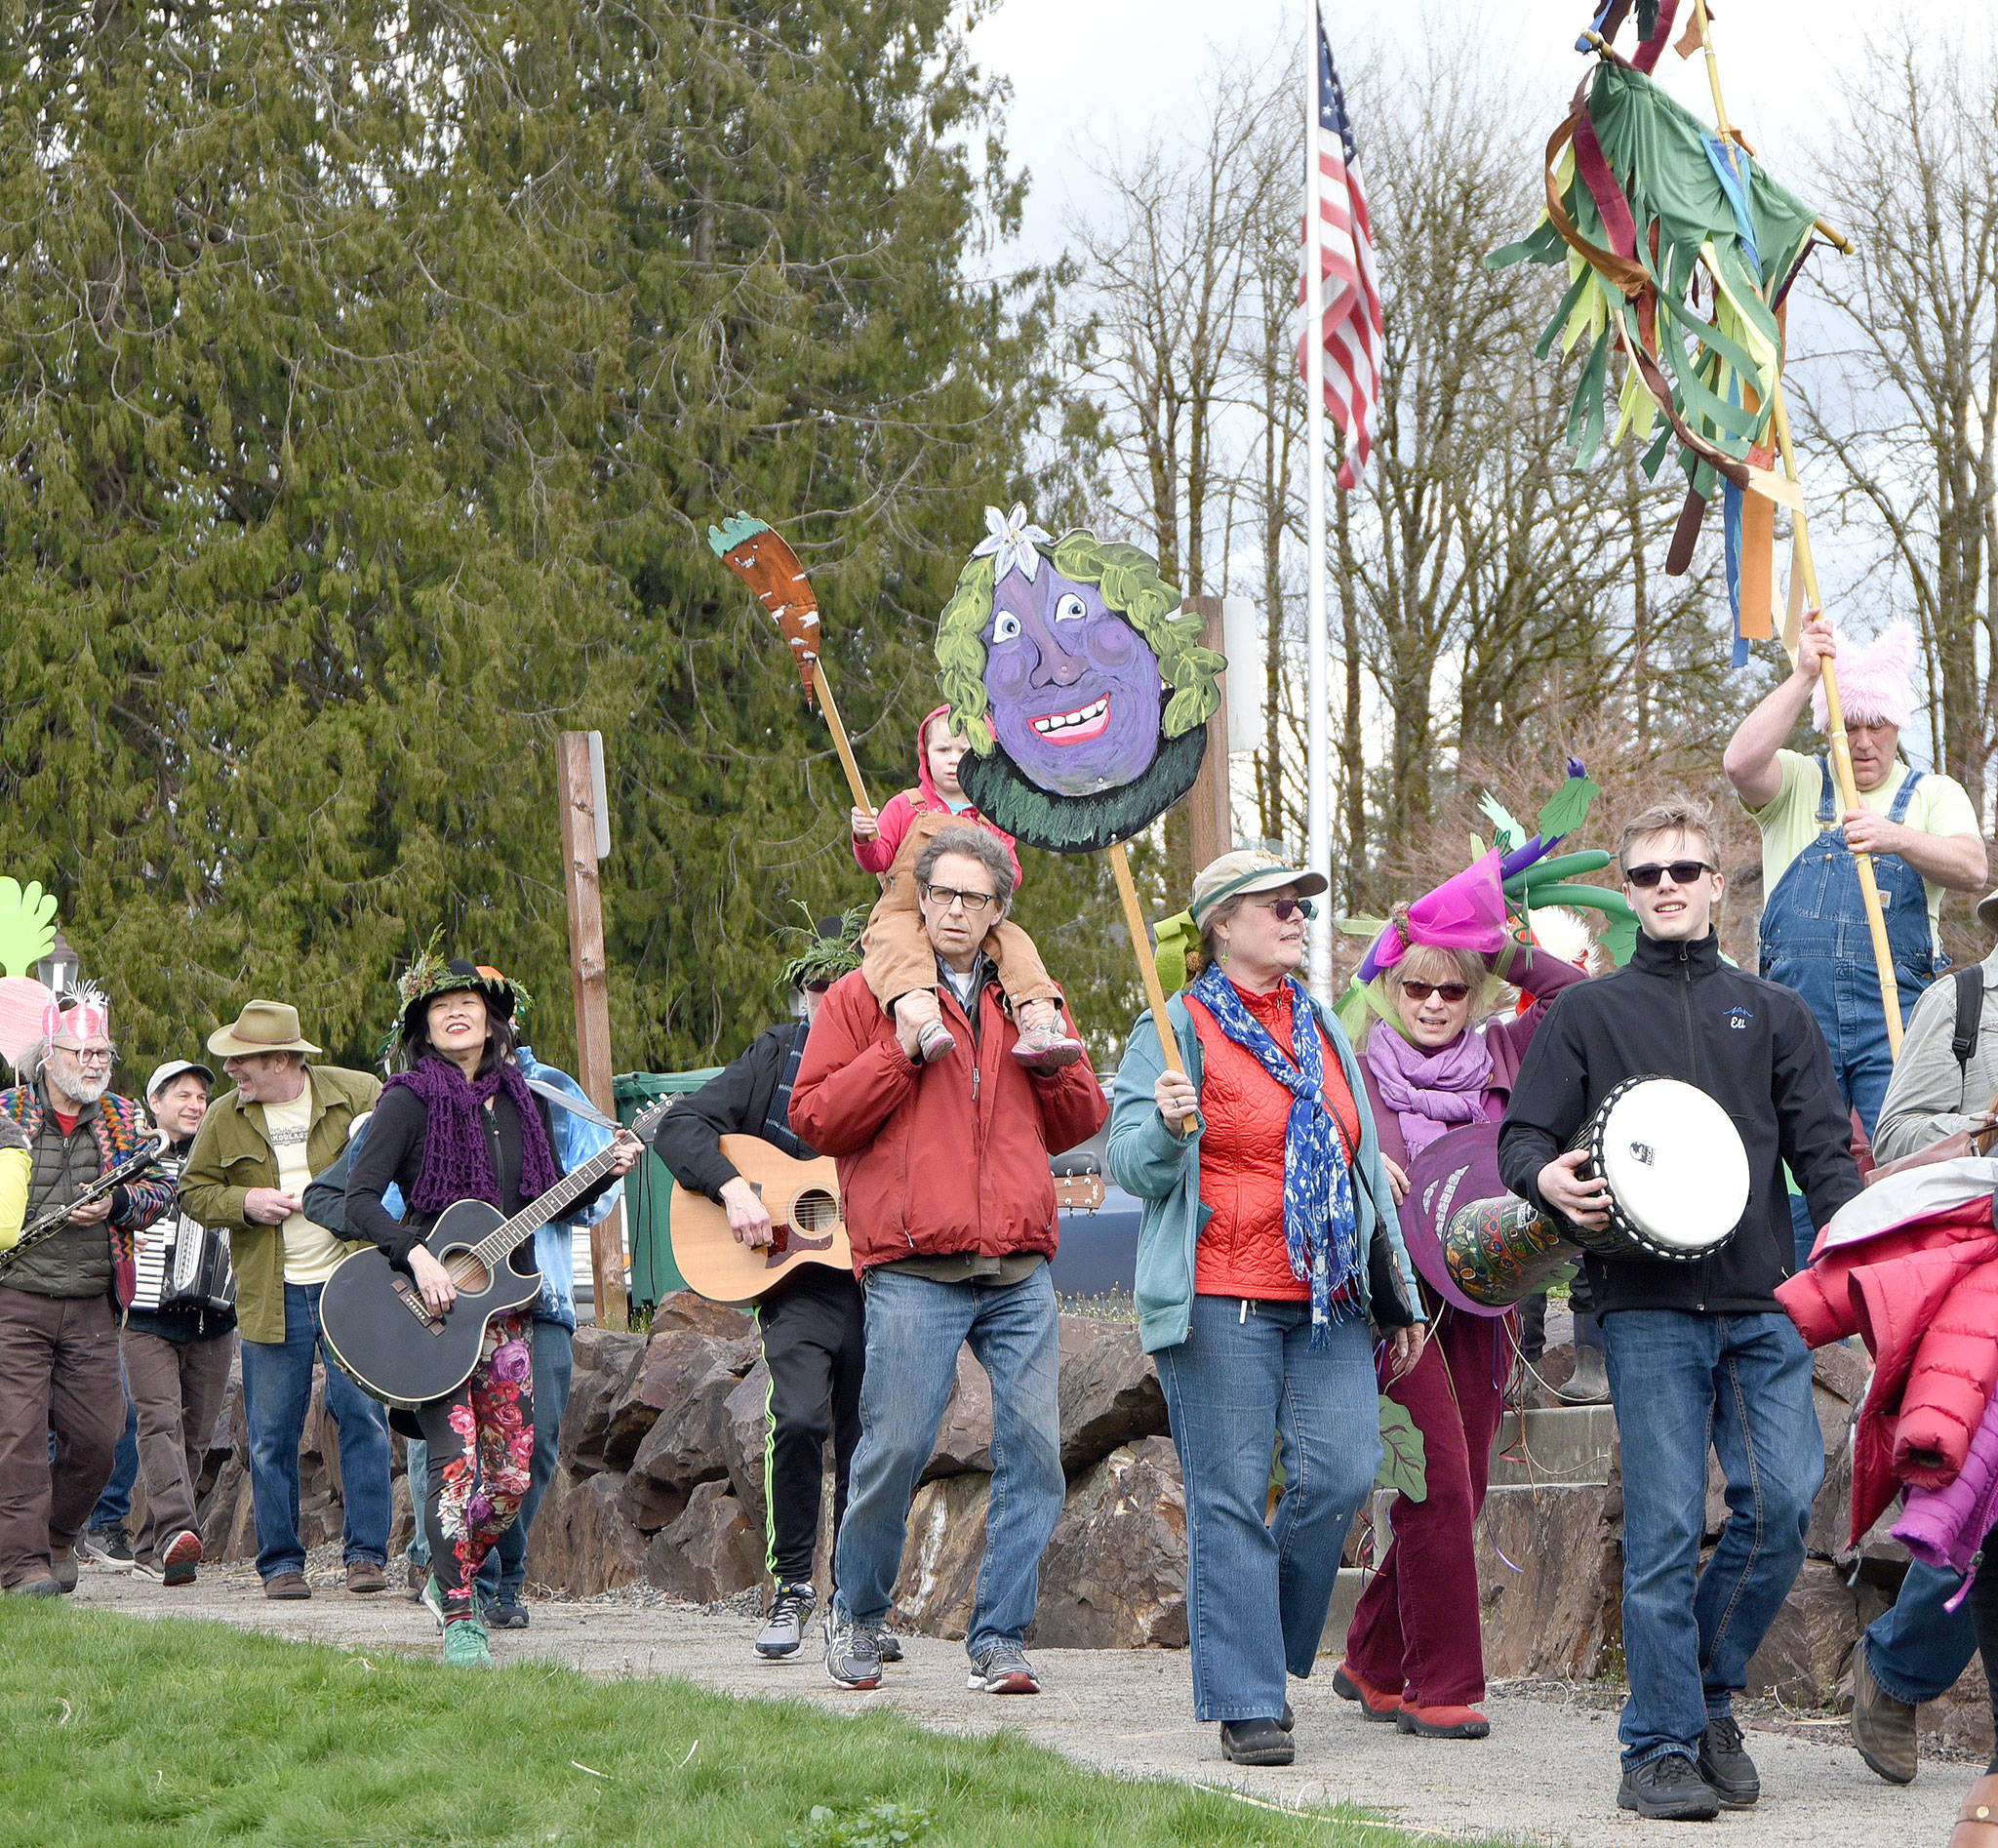 Singing and playing “I heard it through the grapevine,” participants in the March of the Vegetables parade arrived in a festive group for the post-parade celebration in Duvall’s Depot Park.                                Carol Ladwig/Staff Photo